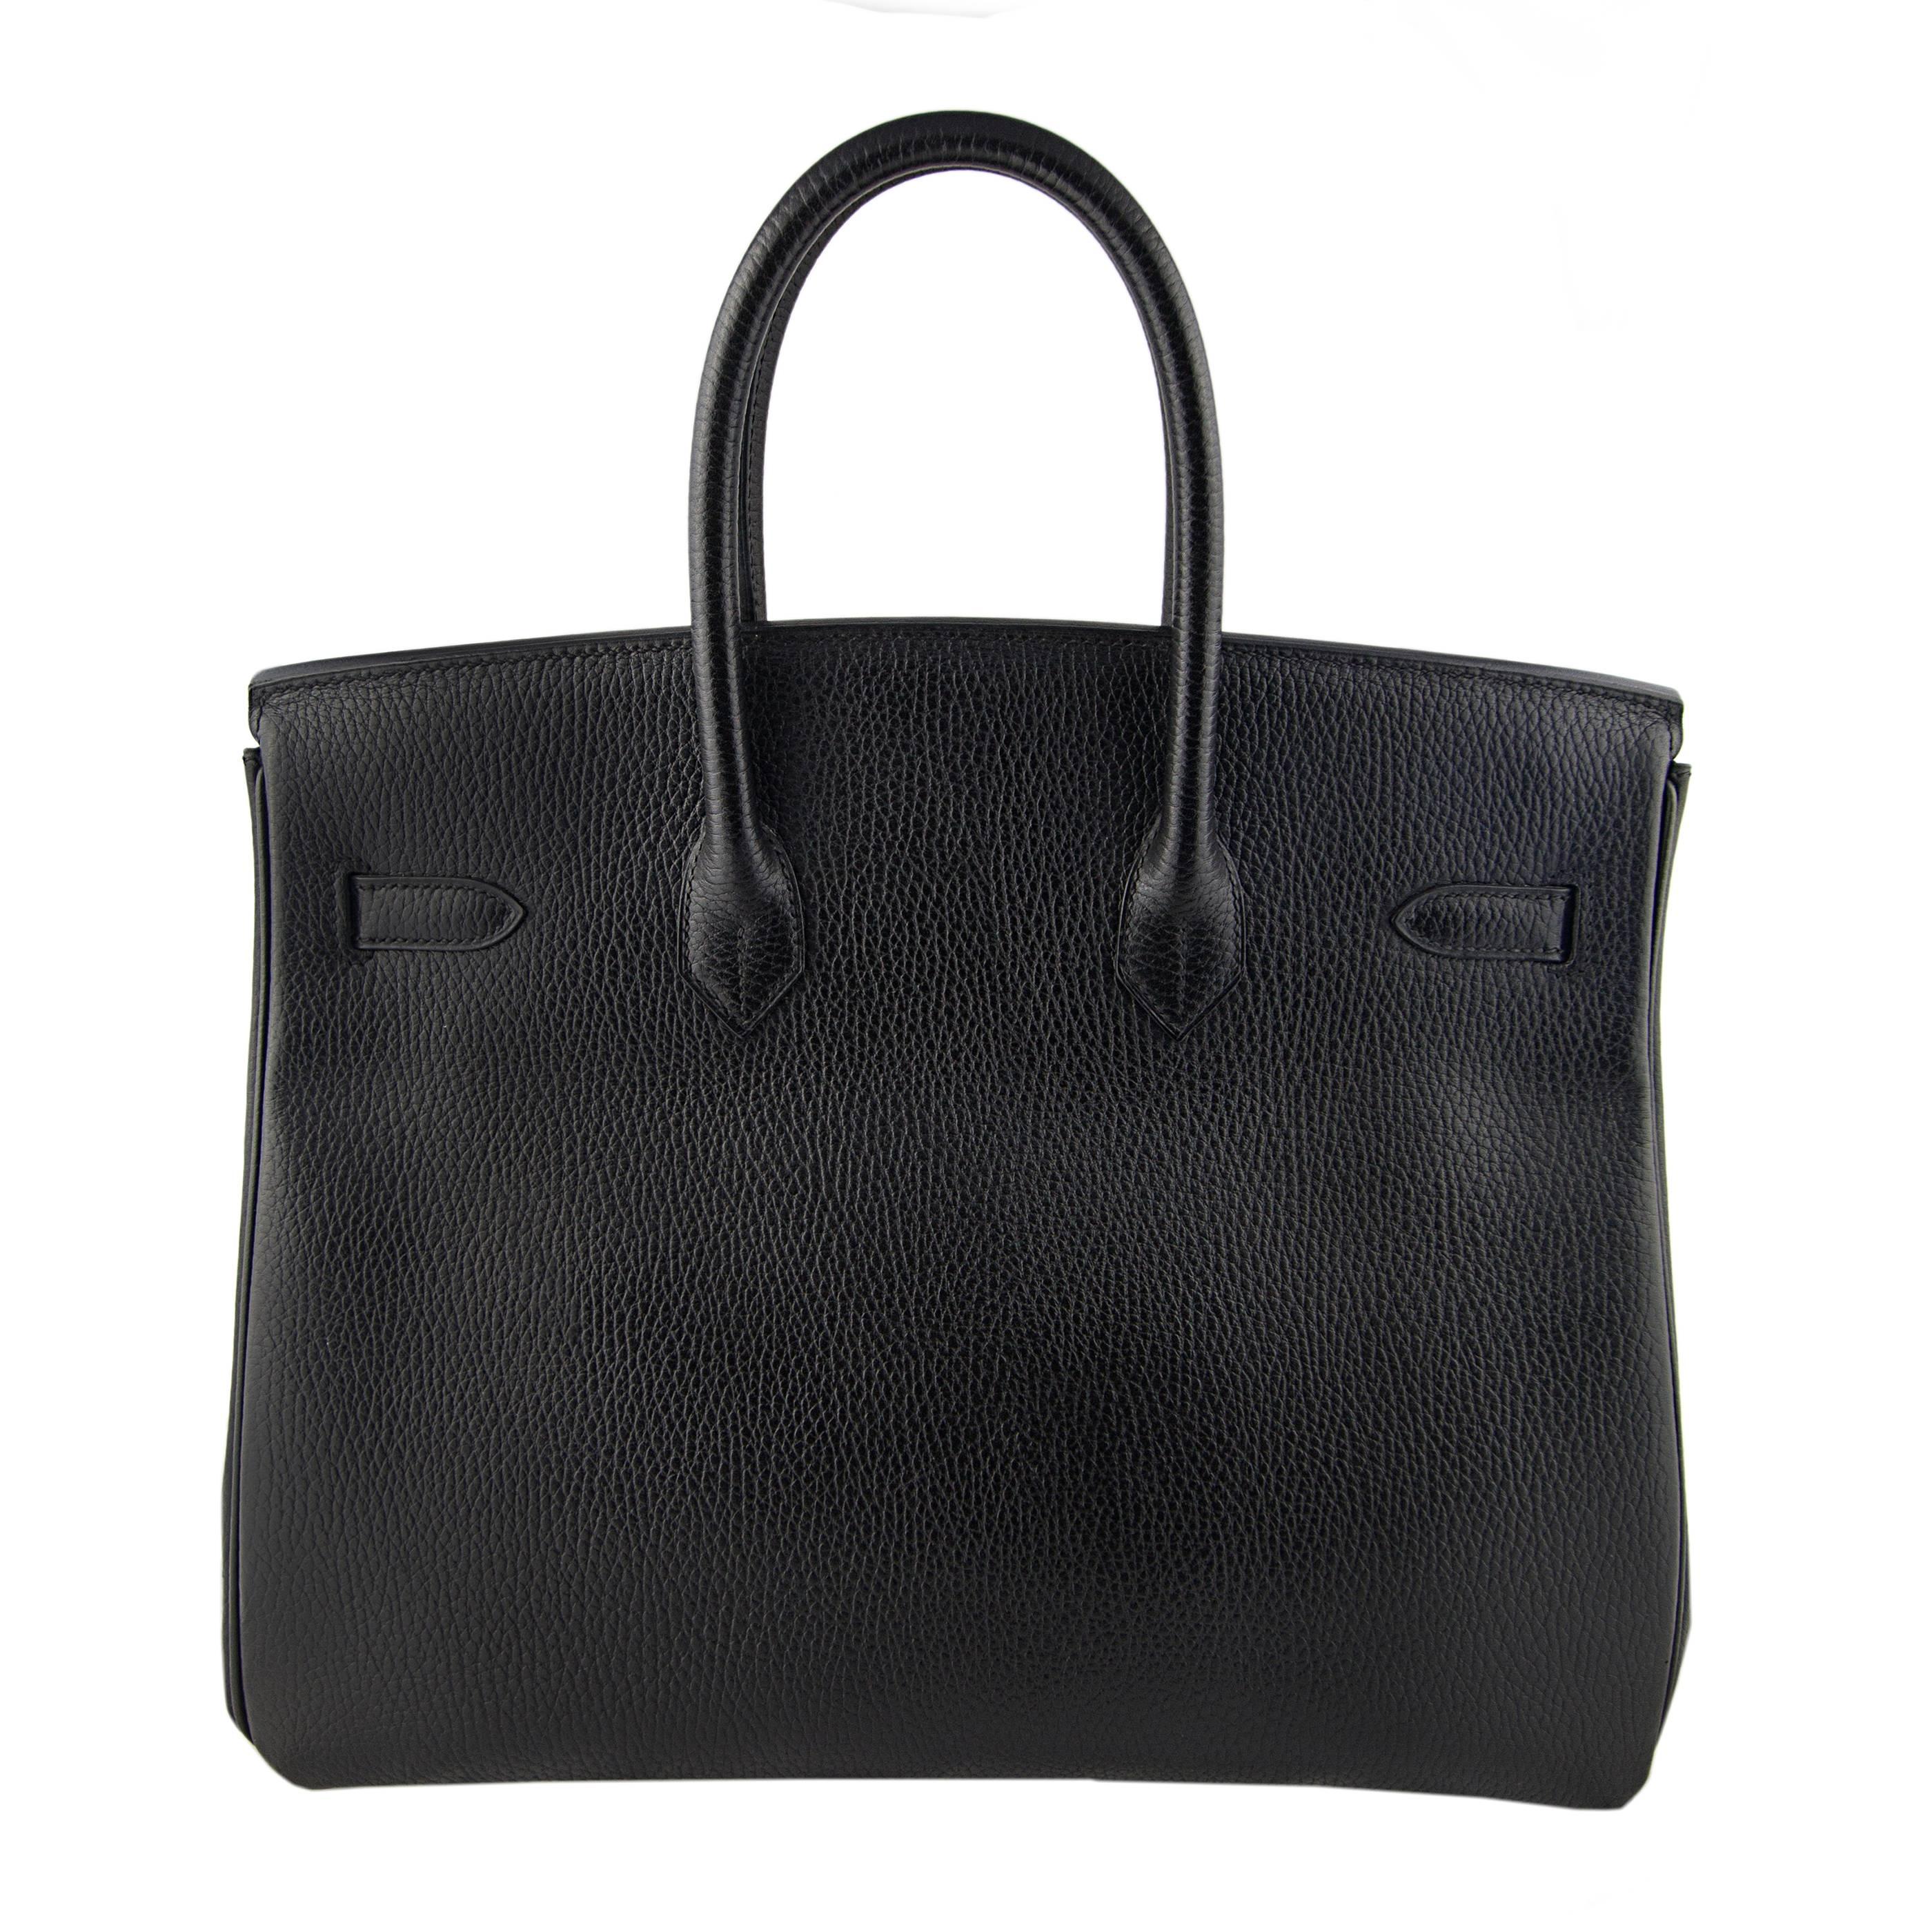 Hermes Black Ardennes Birkin 35 with Gold Hardware In Excellent Condition For Sale In London, GB